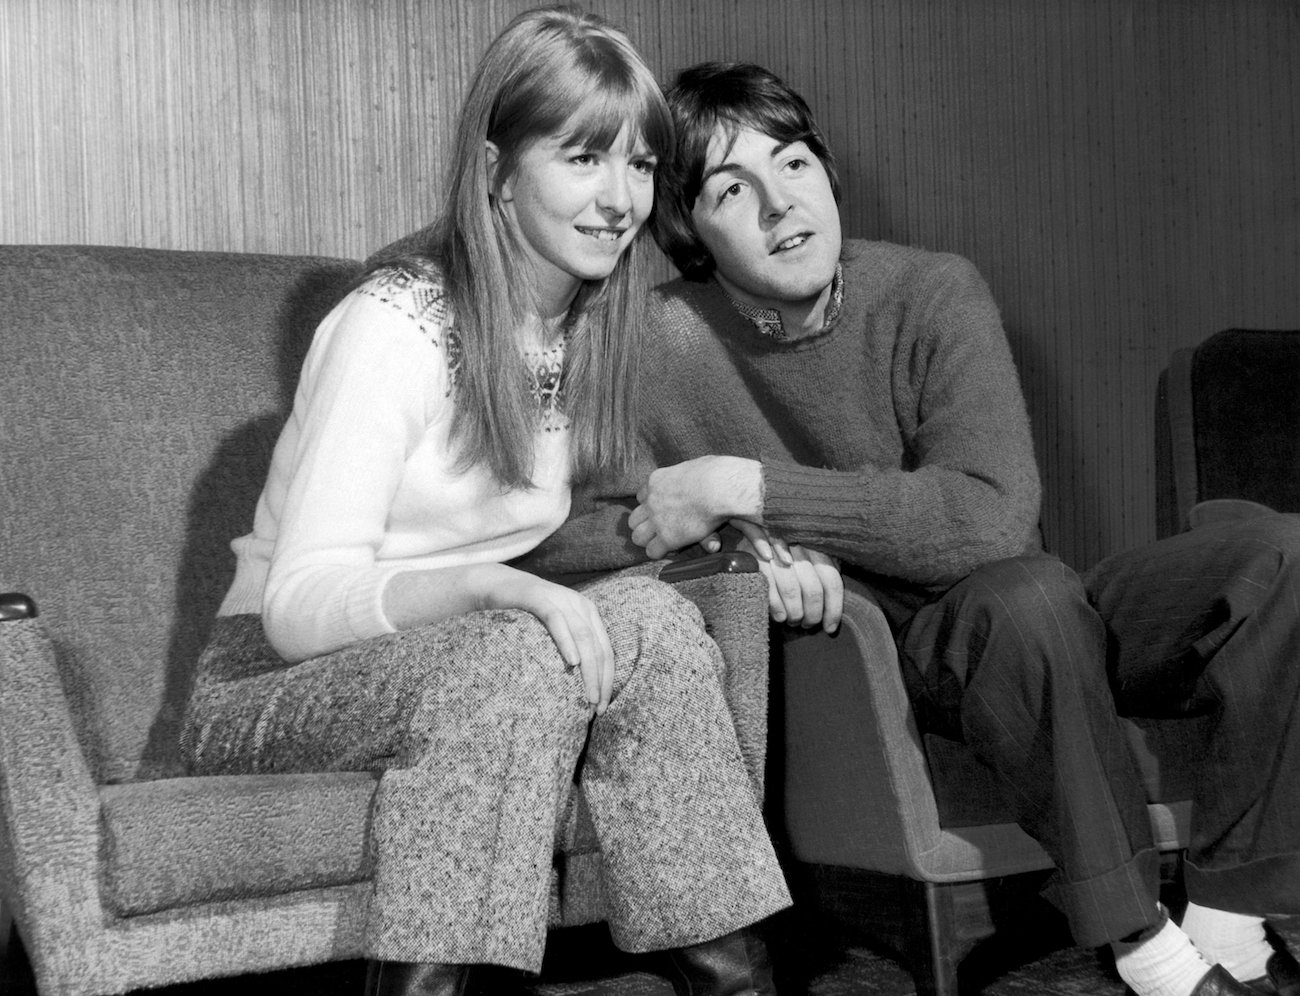 Jane Asher and Paul McCartney in Scotland in 1967.